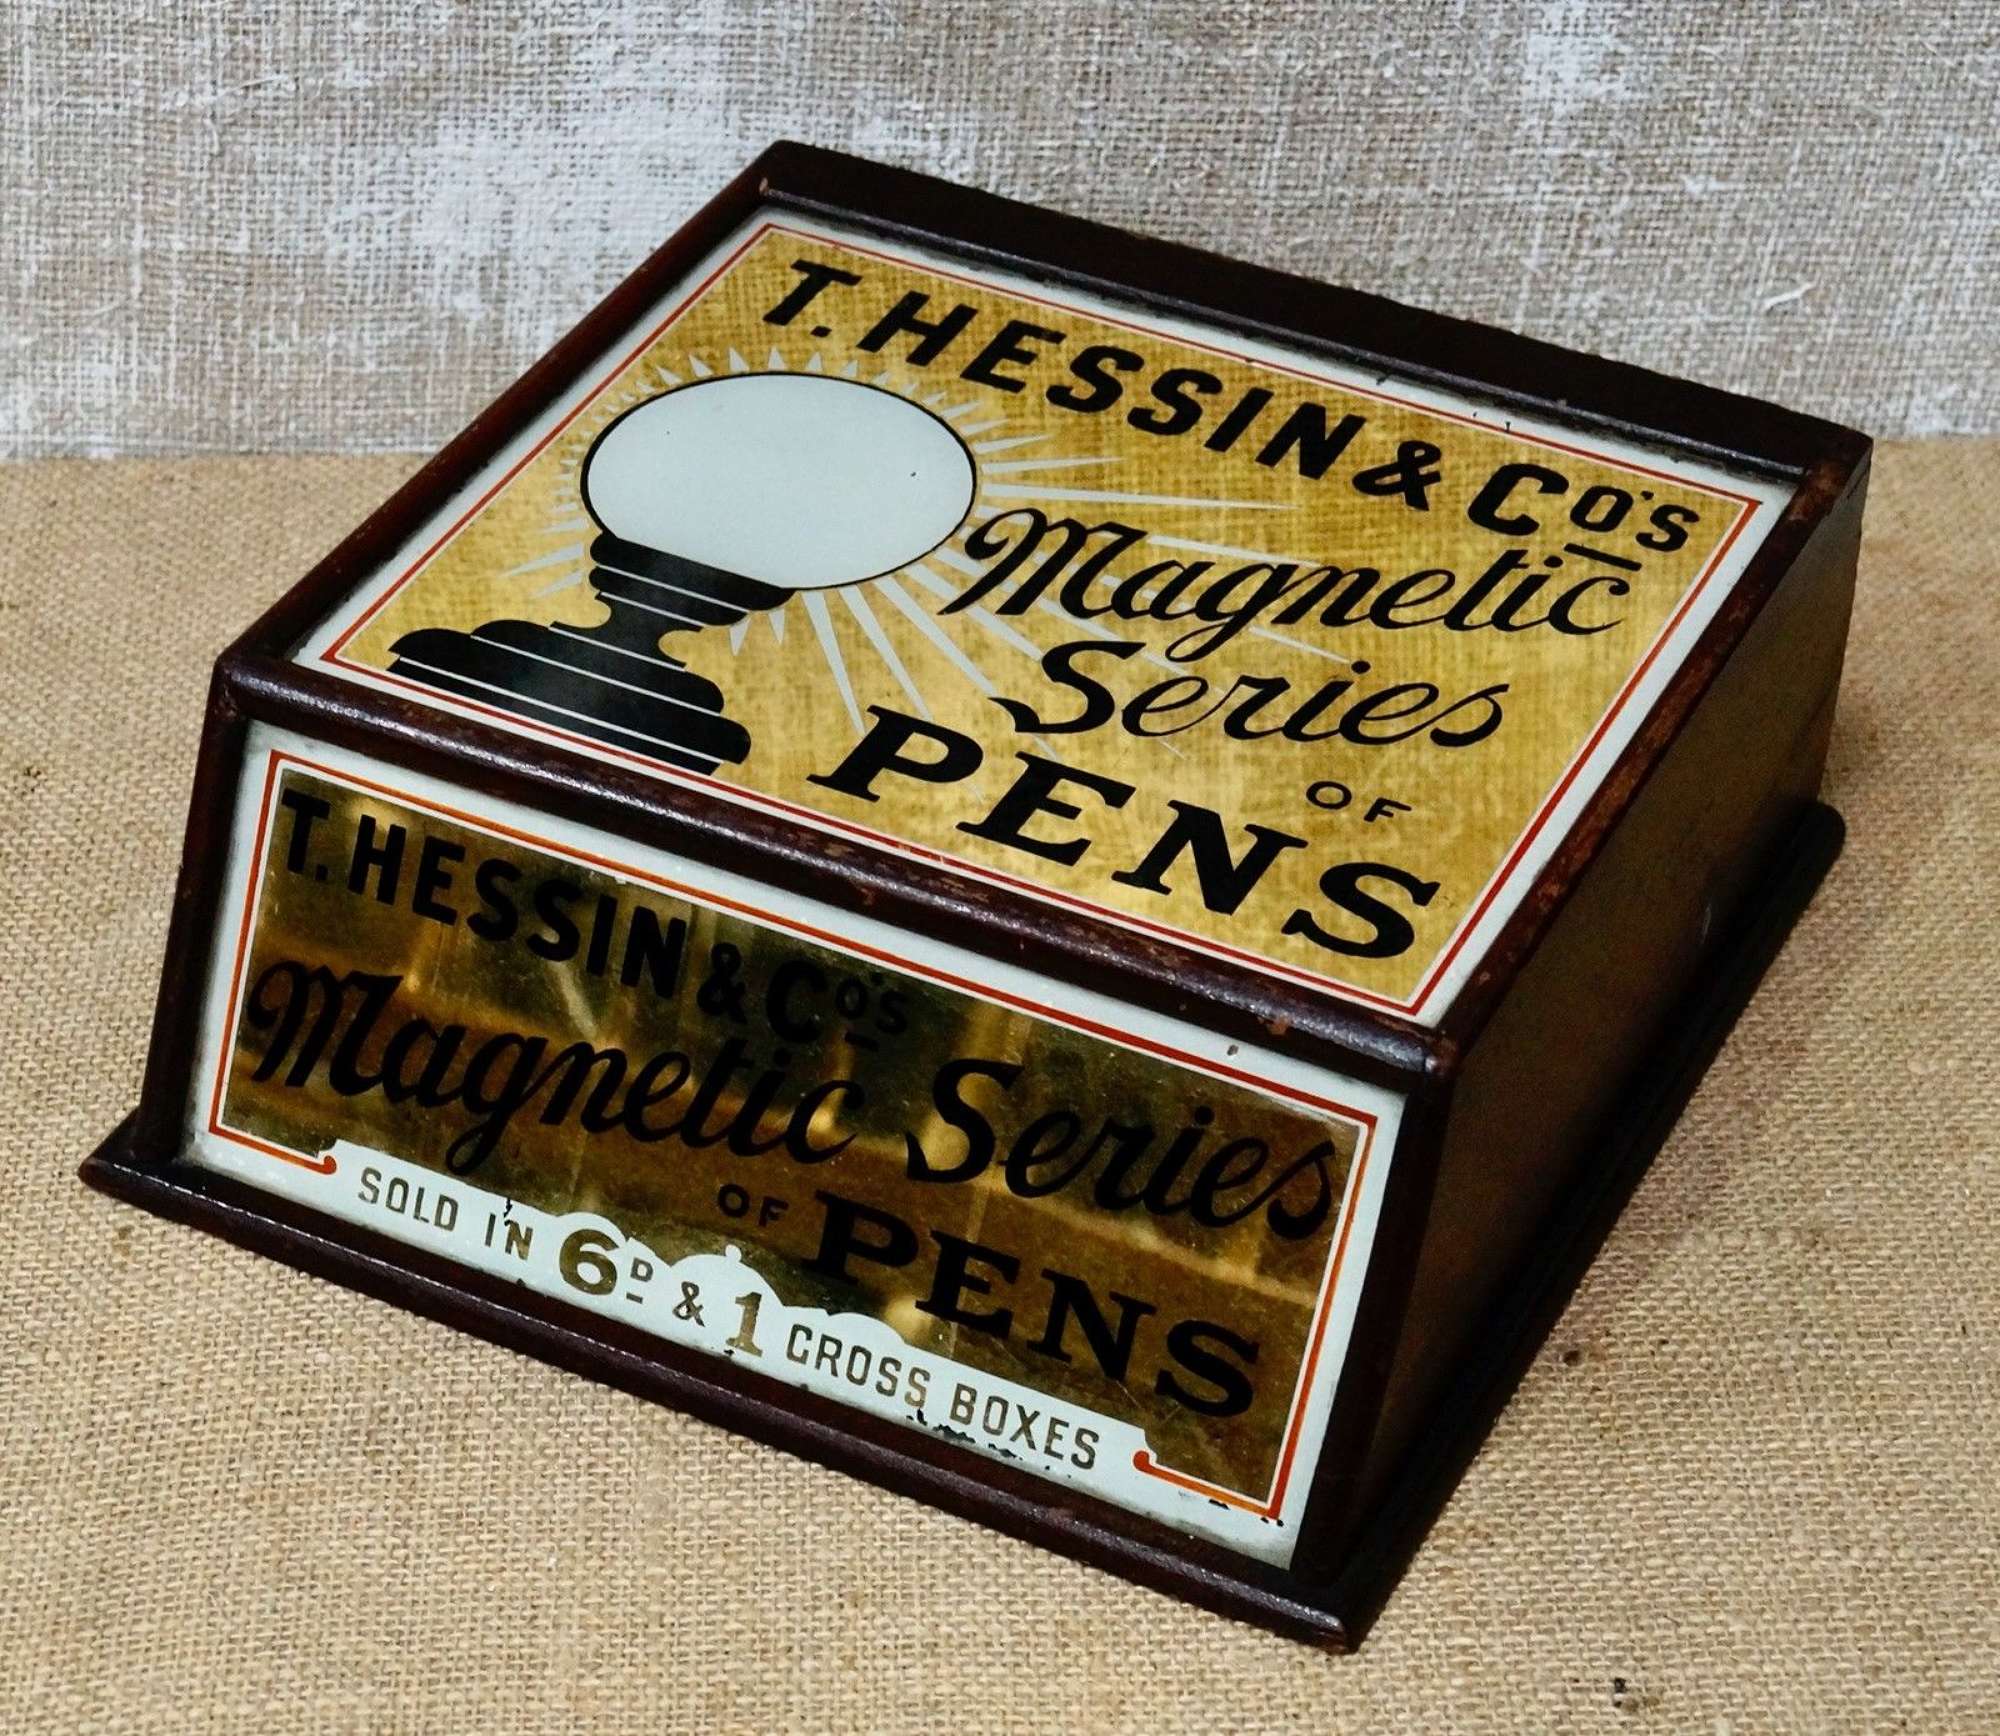 Antique T. Hessin & Co Pens Display Case